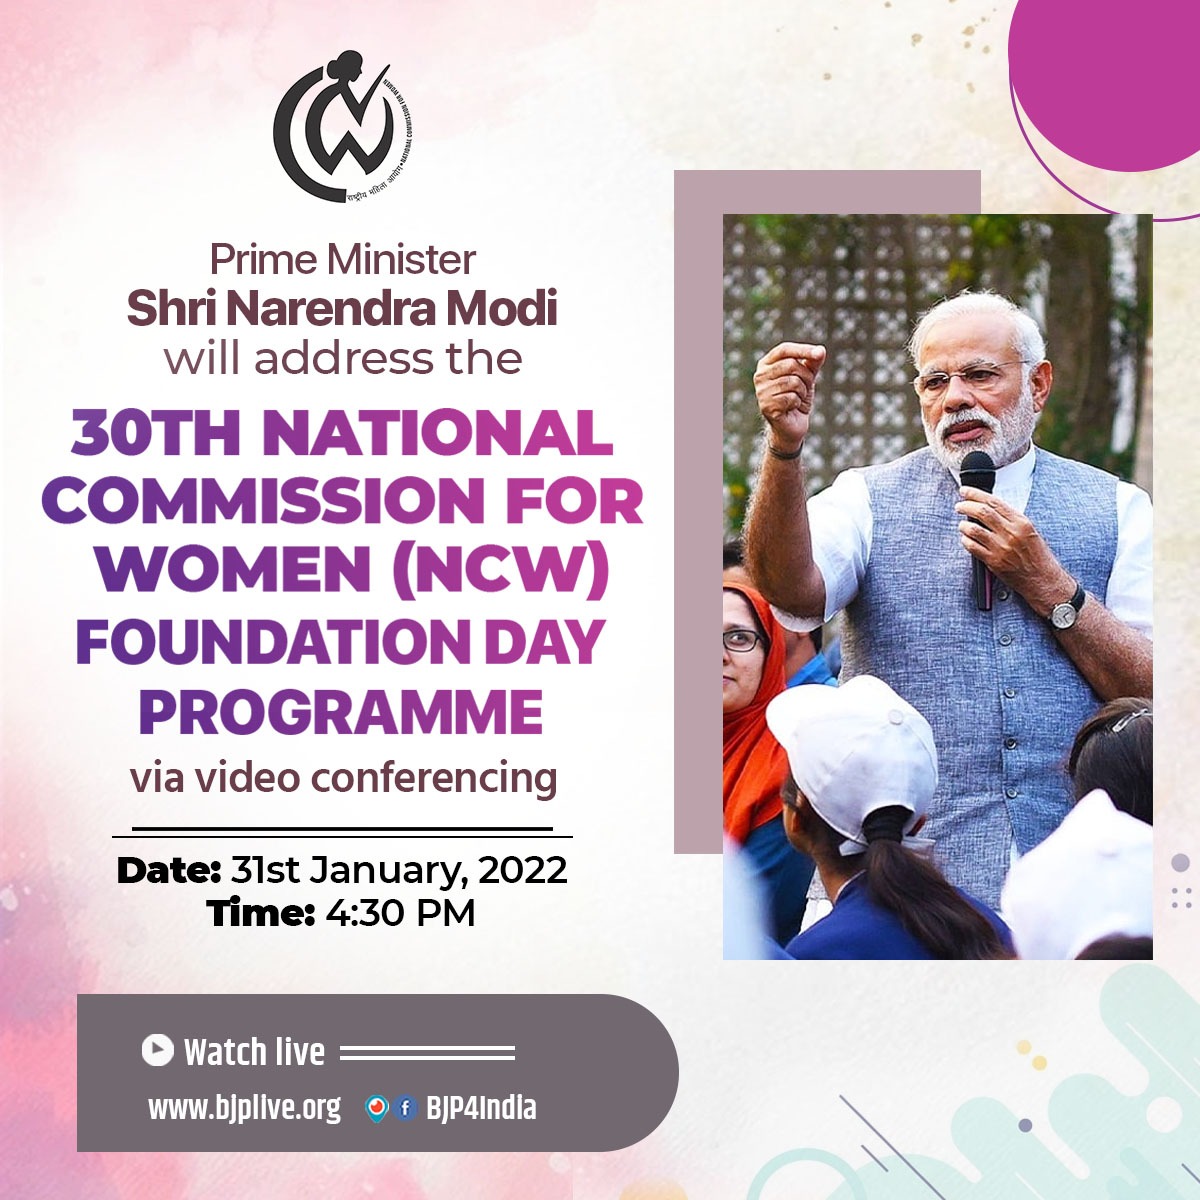 PM Shri @narendramodi will address the 30th National Commission for Women Foundation Day programme on 31st January 2022 via video conferencing. Watch on • x.com/bjp4india • facebook.com/BJP4India • youtube.com/BJP4India • bjplive.org